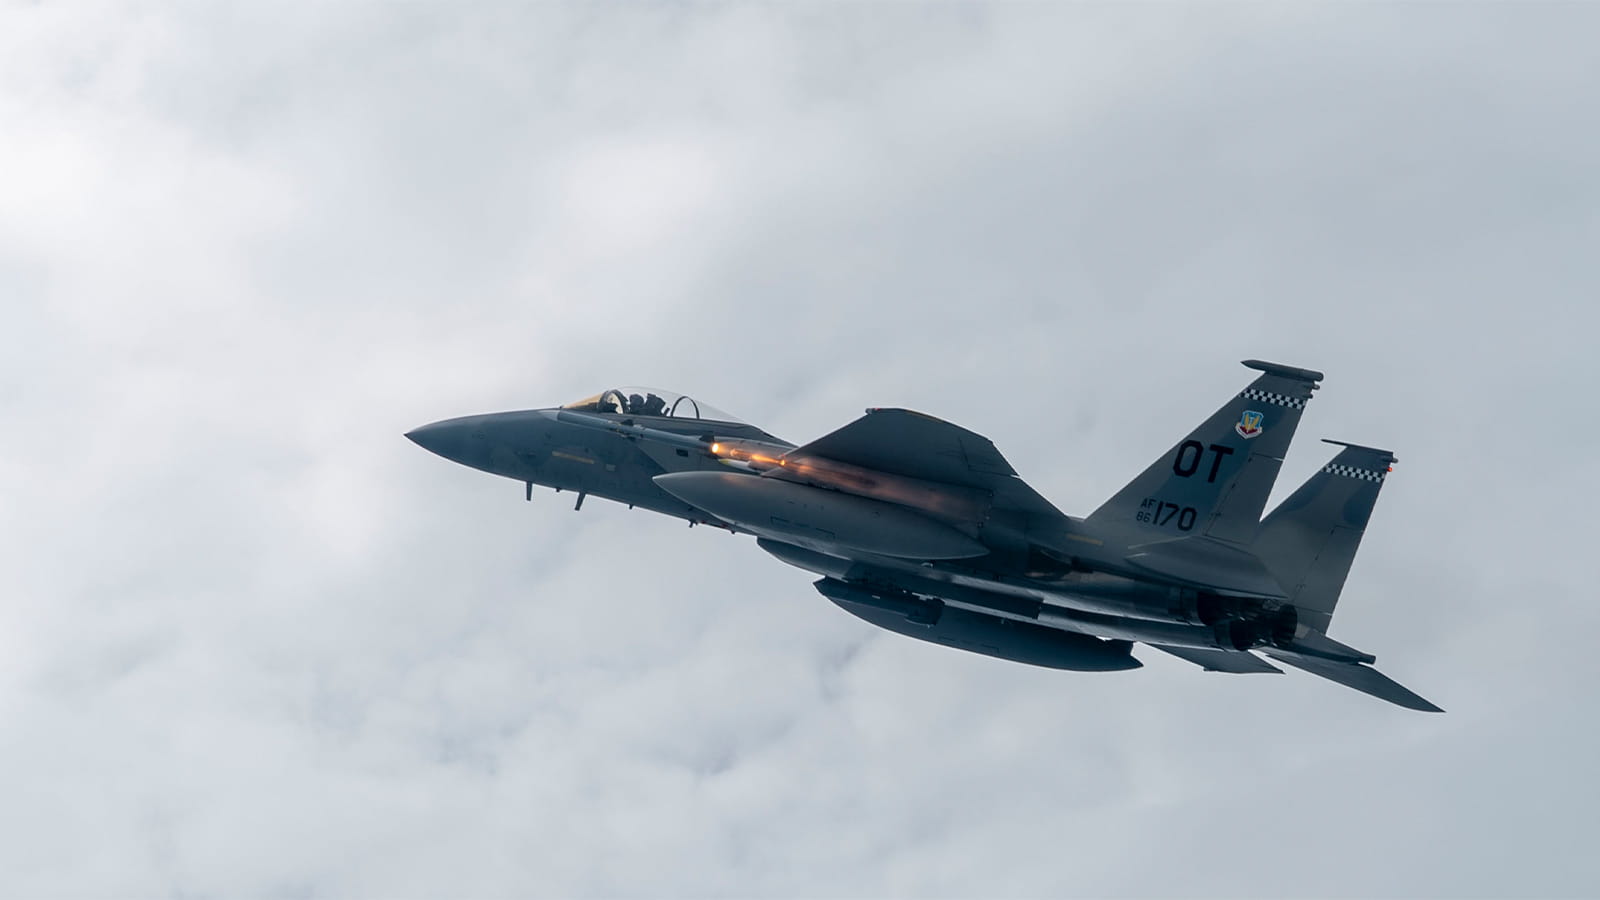 Maj. Timothy Phillips from the 40th Flight Test Squadron fires an Advanced Medium Range Air to Air Missile during a test mission from an F-15C Eagle, Eglin Air Force Base, Fla., Feb. 25, 2020. The 40th FLTS executes fighter developmental test and support to deliver war-winning capabilities to the battlefield. (U.S. Air Force photo by Tech. Sgt. John McRell)